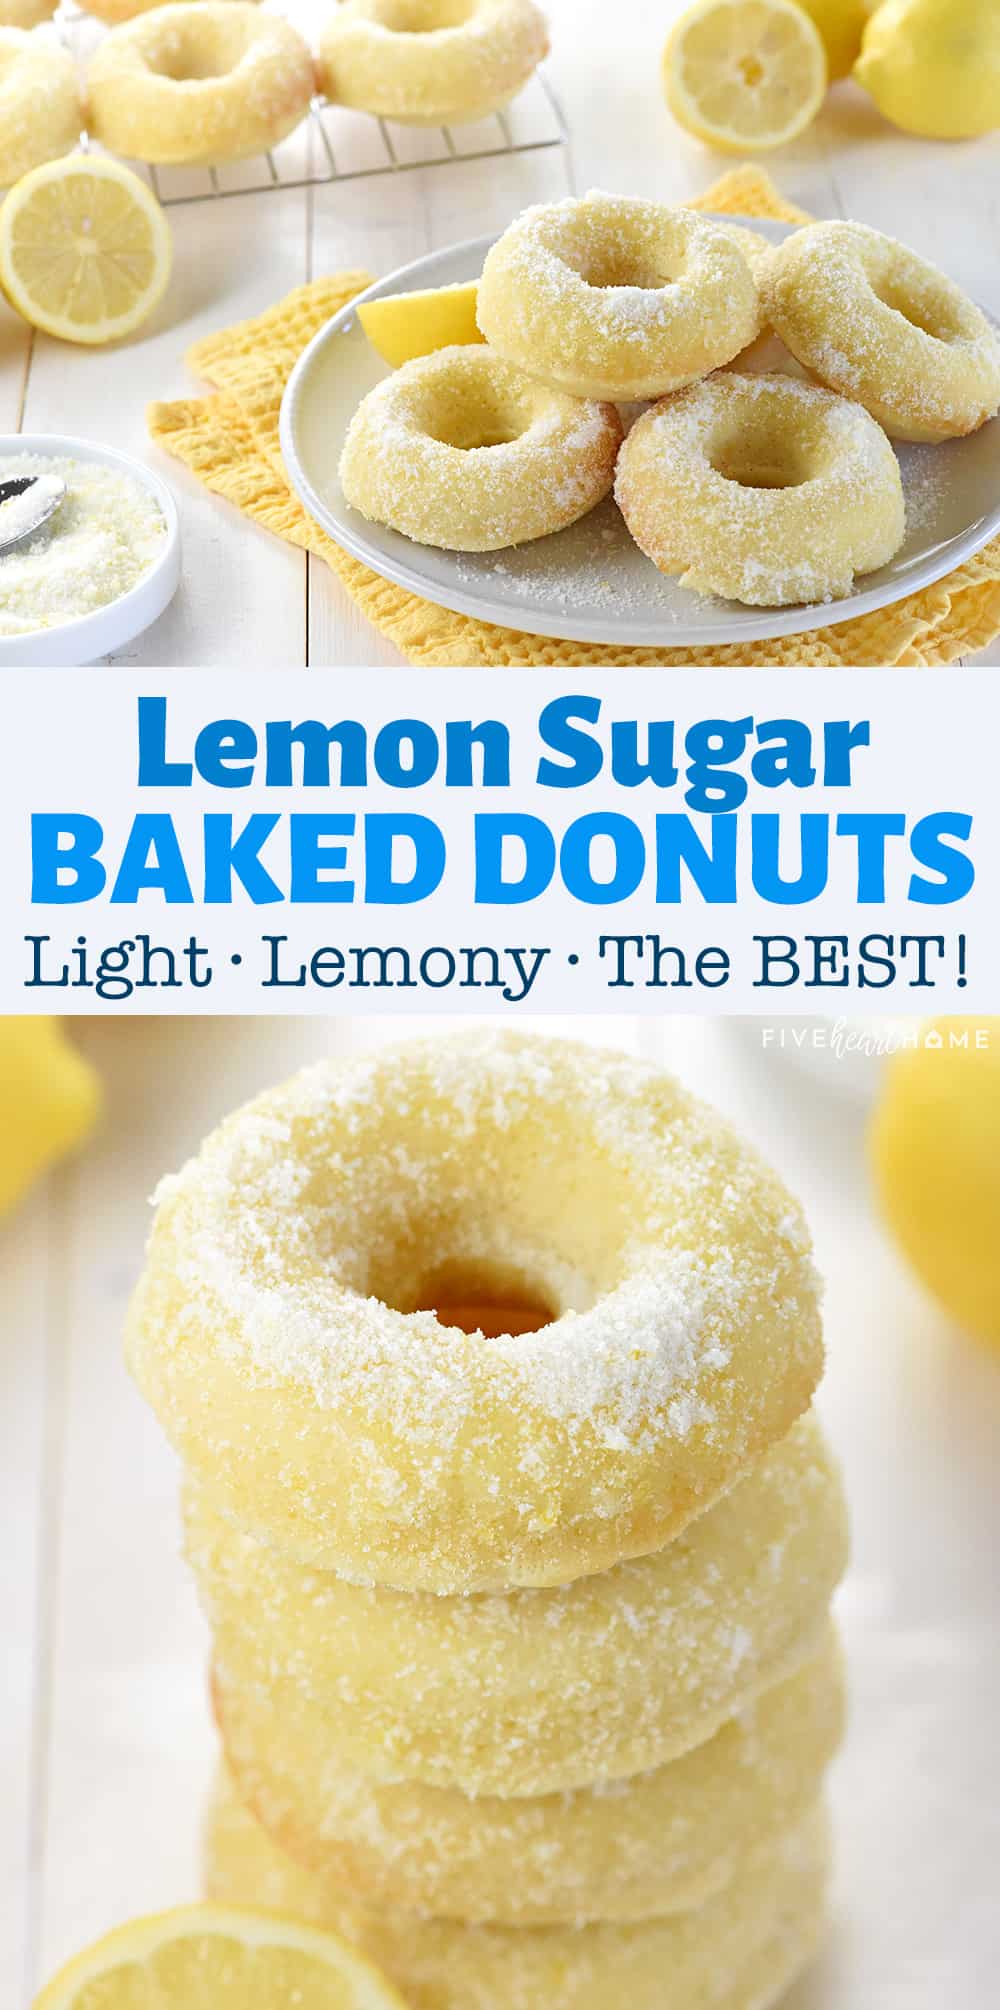 Lemon Sugar Baked Donuts ~ light, citrusy, and generously coated in a crunchy, lemon-zest infused sugar...the perfect sunny treat for breakfast or dessert! | FiveHeartHome.com via @fivehearthome